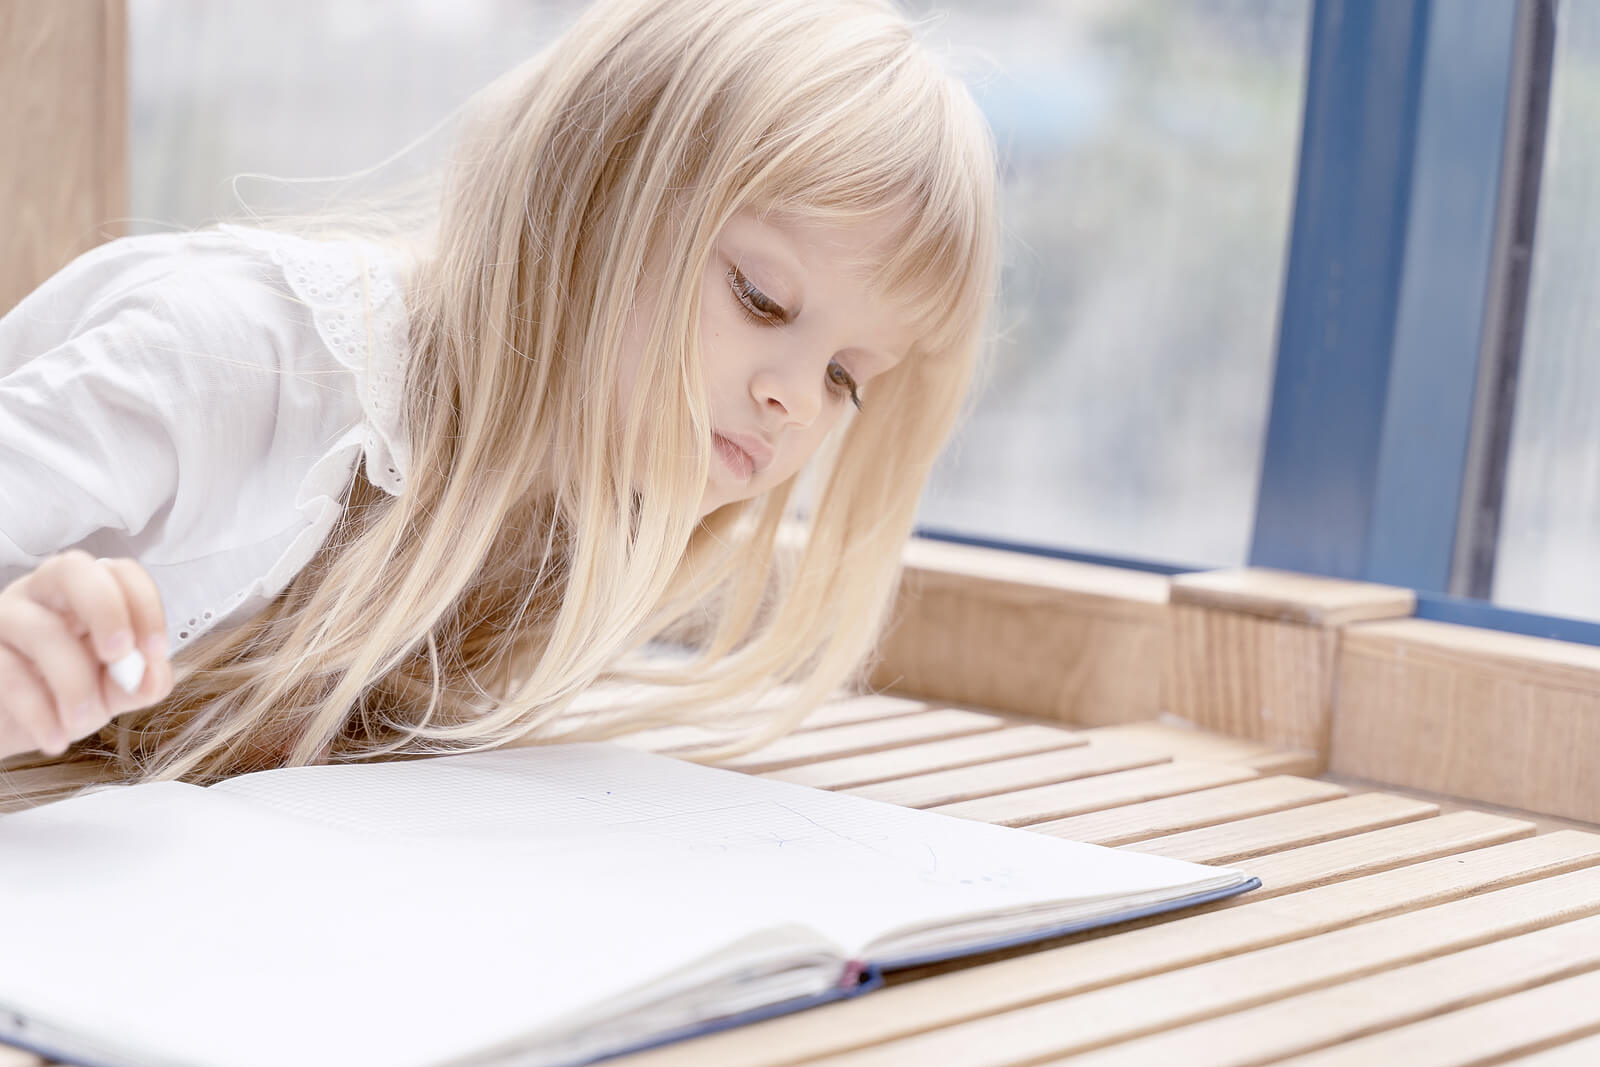 A young girl leaning handwriting.